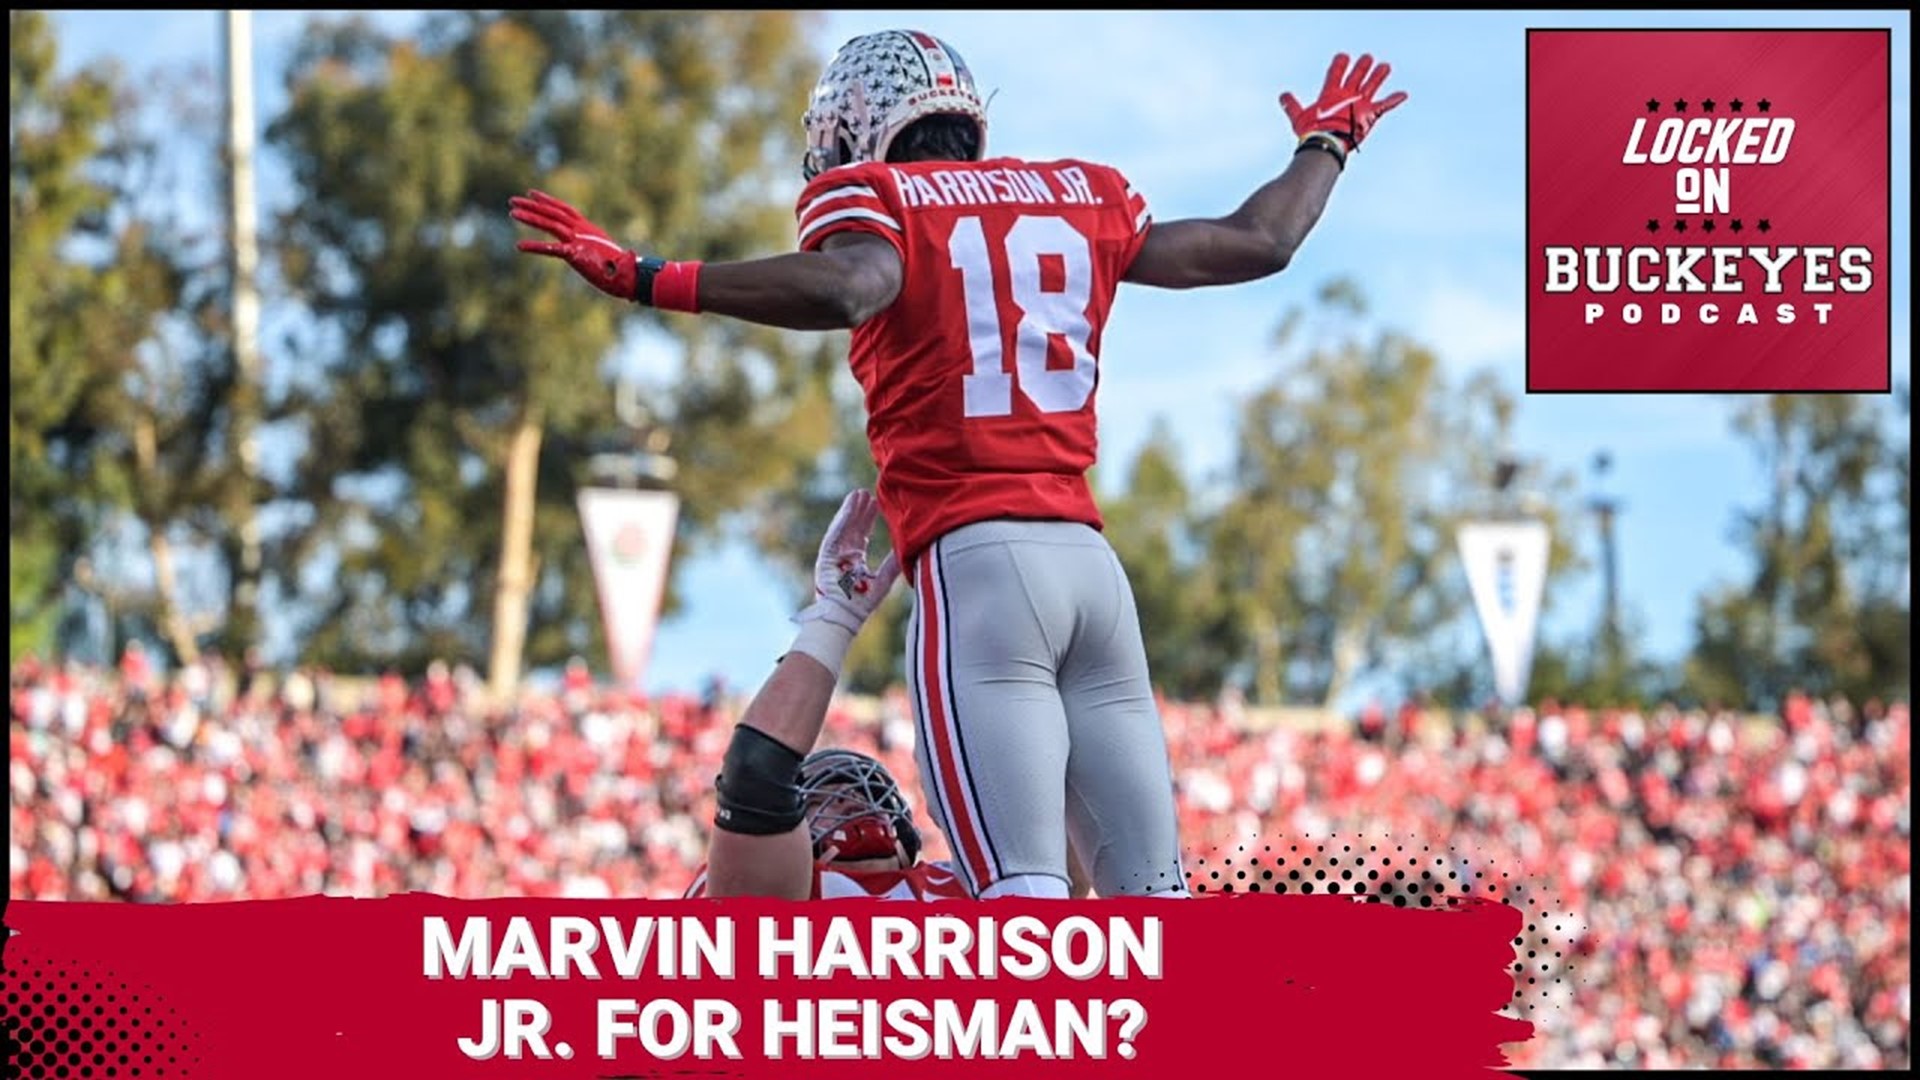 Ohio State has been fortunate to have elite receivers in every recruiting class for the past few years. One of the best in this group is Marvin Harrison Jr.